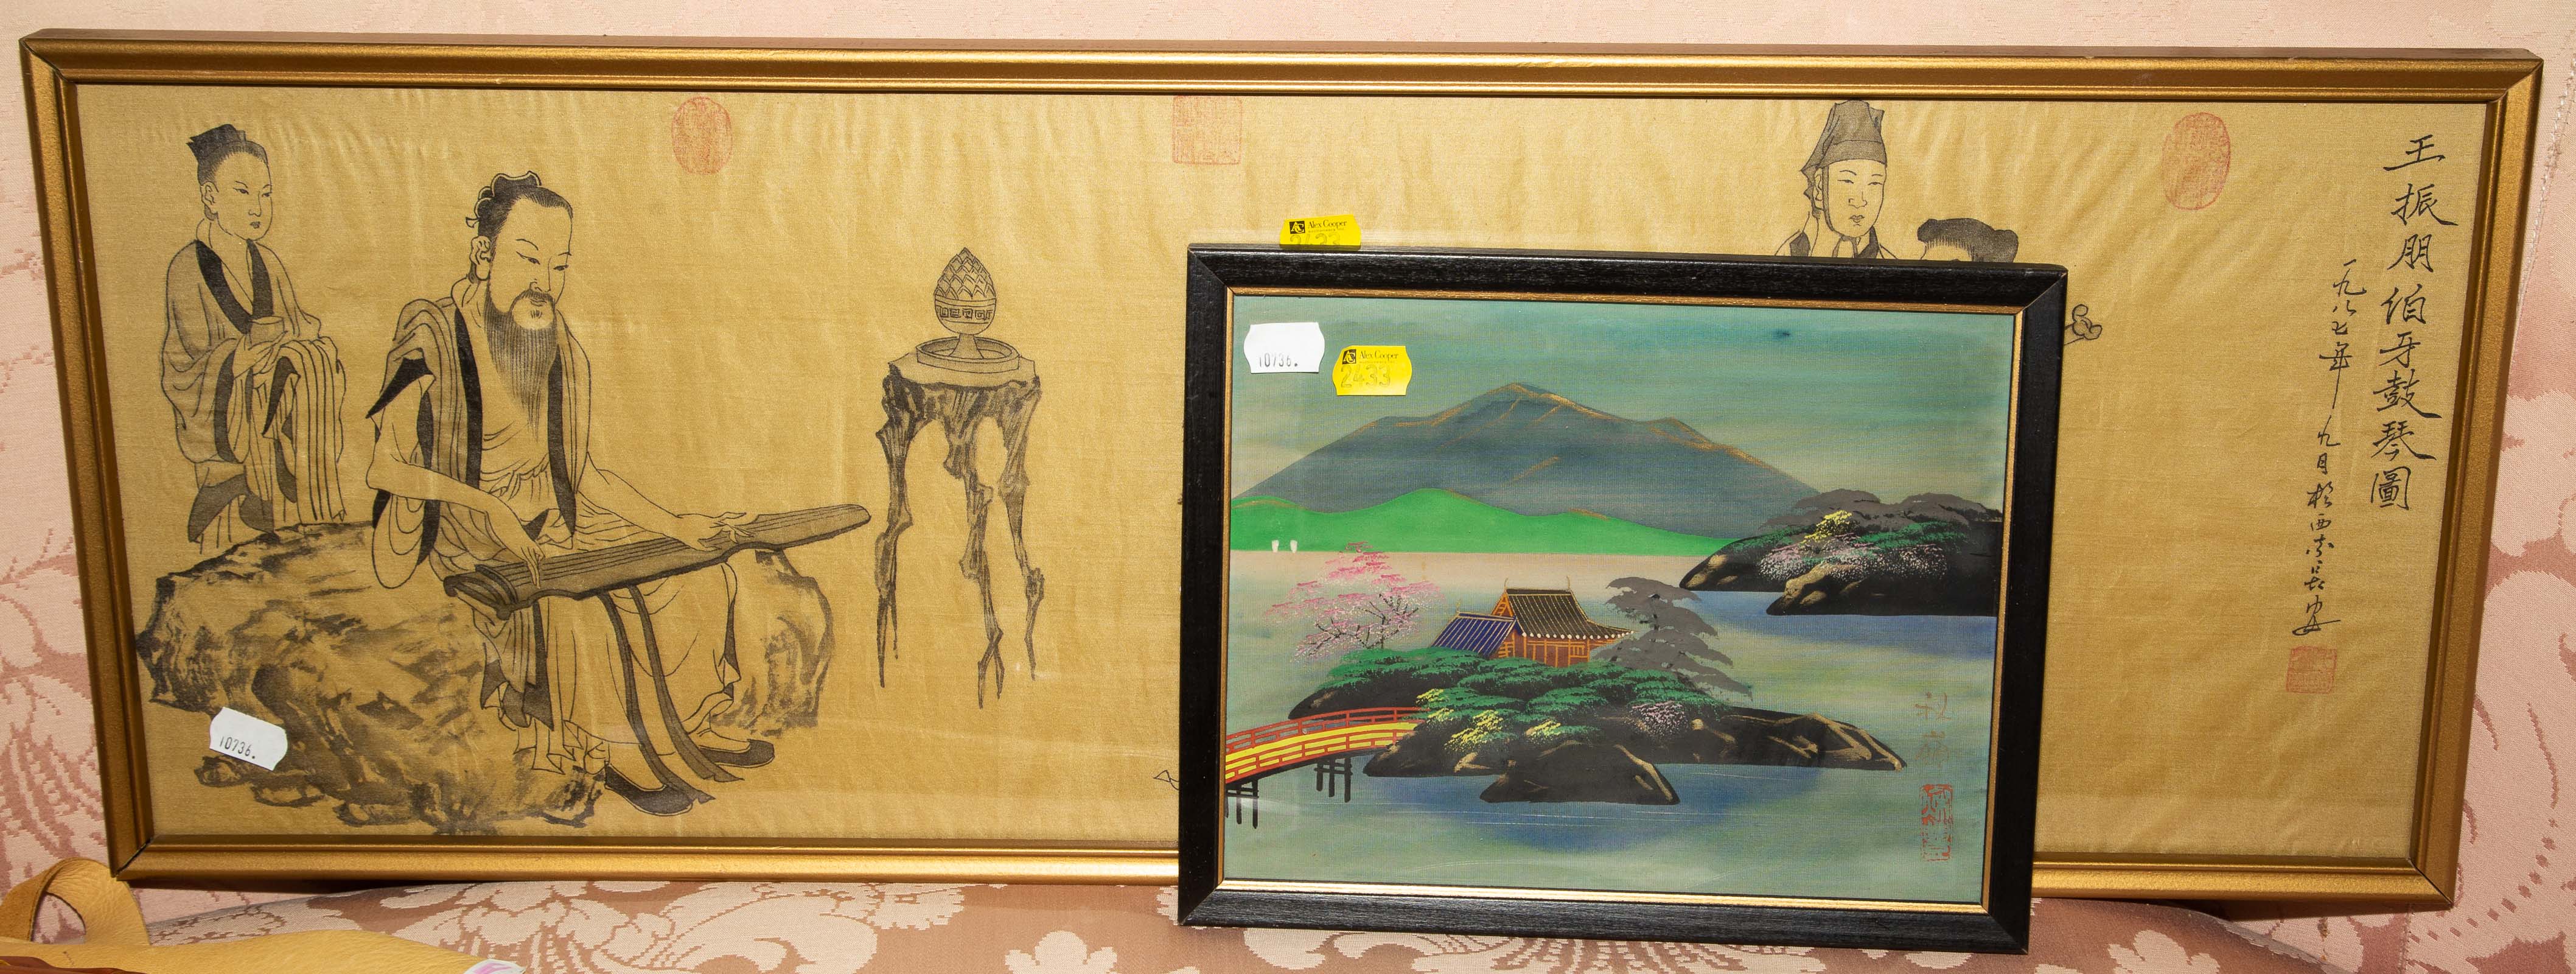 TWO ASIAN STYLE FRAMED PRINTS  337c66